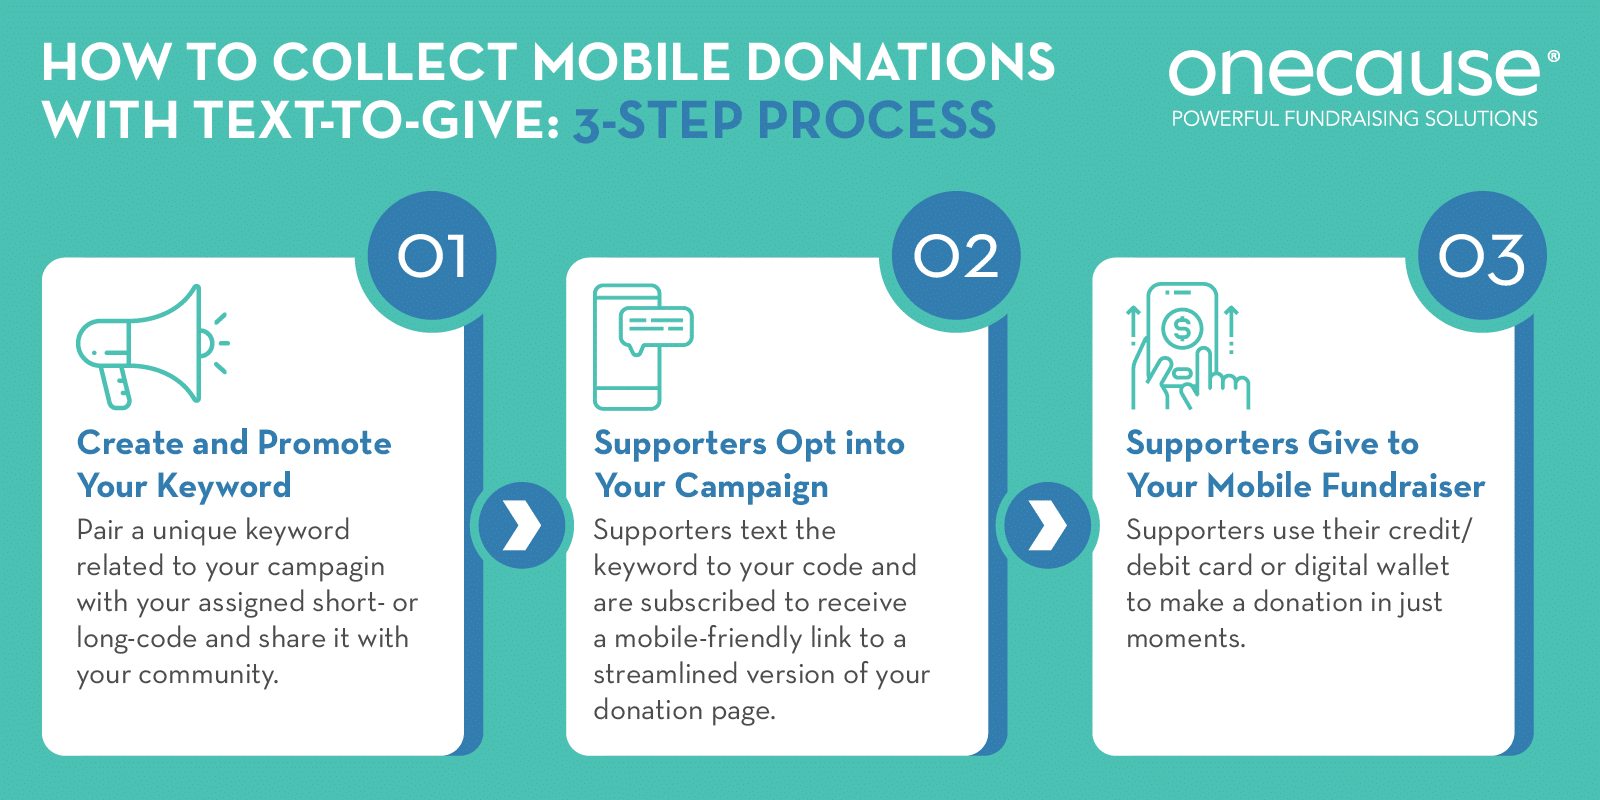 Higher Education Fundraising: 8 Ways To Optimize Your Donation Page